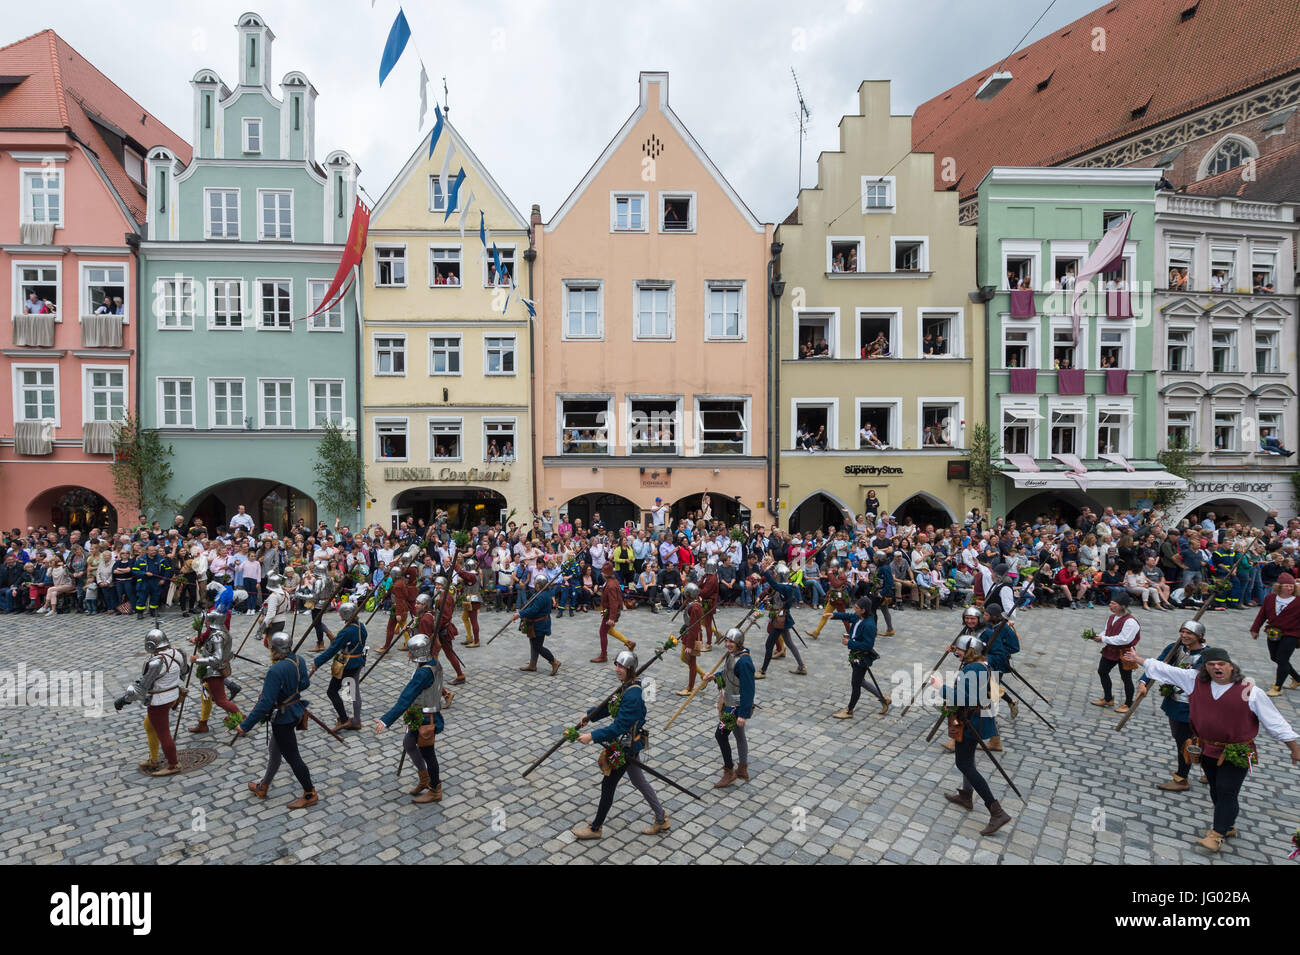 Landshut, Germany. 2nd July, 2017. People in historical costumes, photographed at the parade of the Landshut Wedding (German: 'Landshuter Hochzeit') in the old town of Landshut, Germany, 2 July 2017. The citizens of the Lower Bavarian regional capital reenact the wedding ceremony of the the son of the Duke of Bavaria, George, and the Polish King's daughter Hedwig in 1475. Photo: Armin Weigel/dpa/Alamy Live News Stock Photo